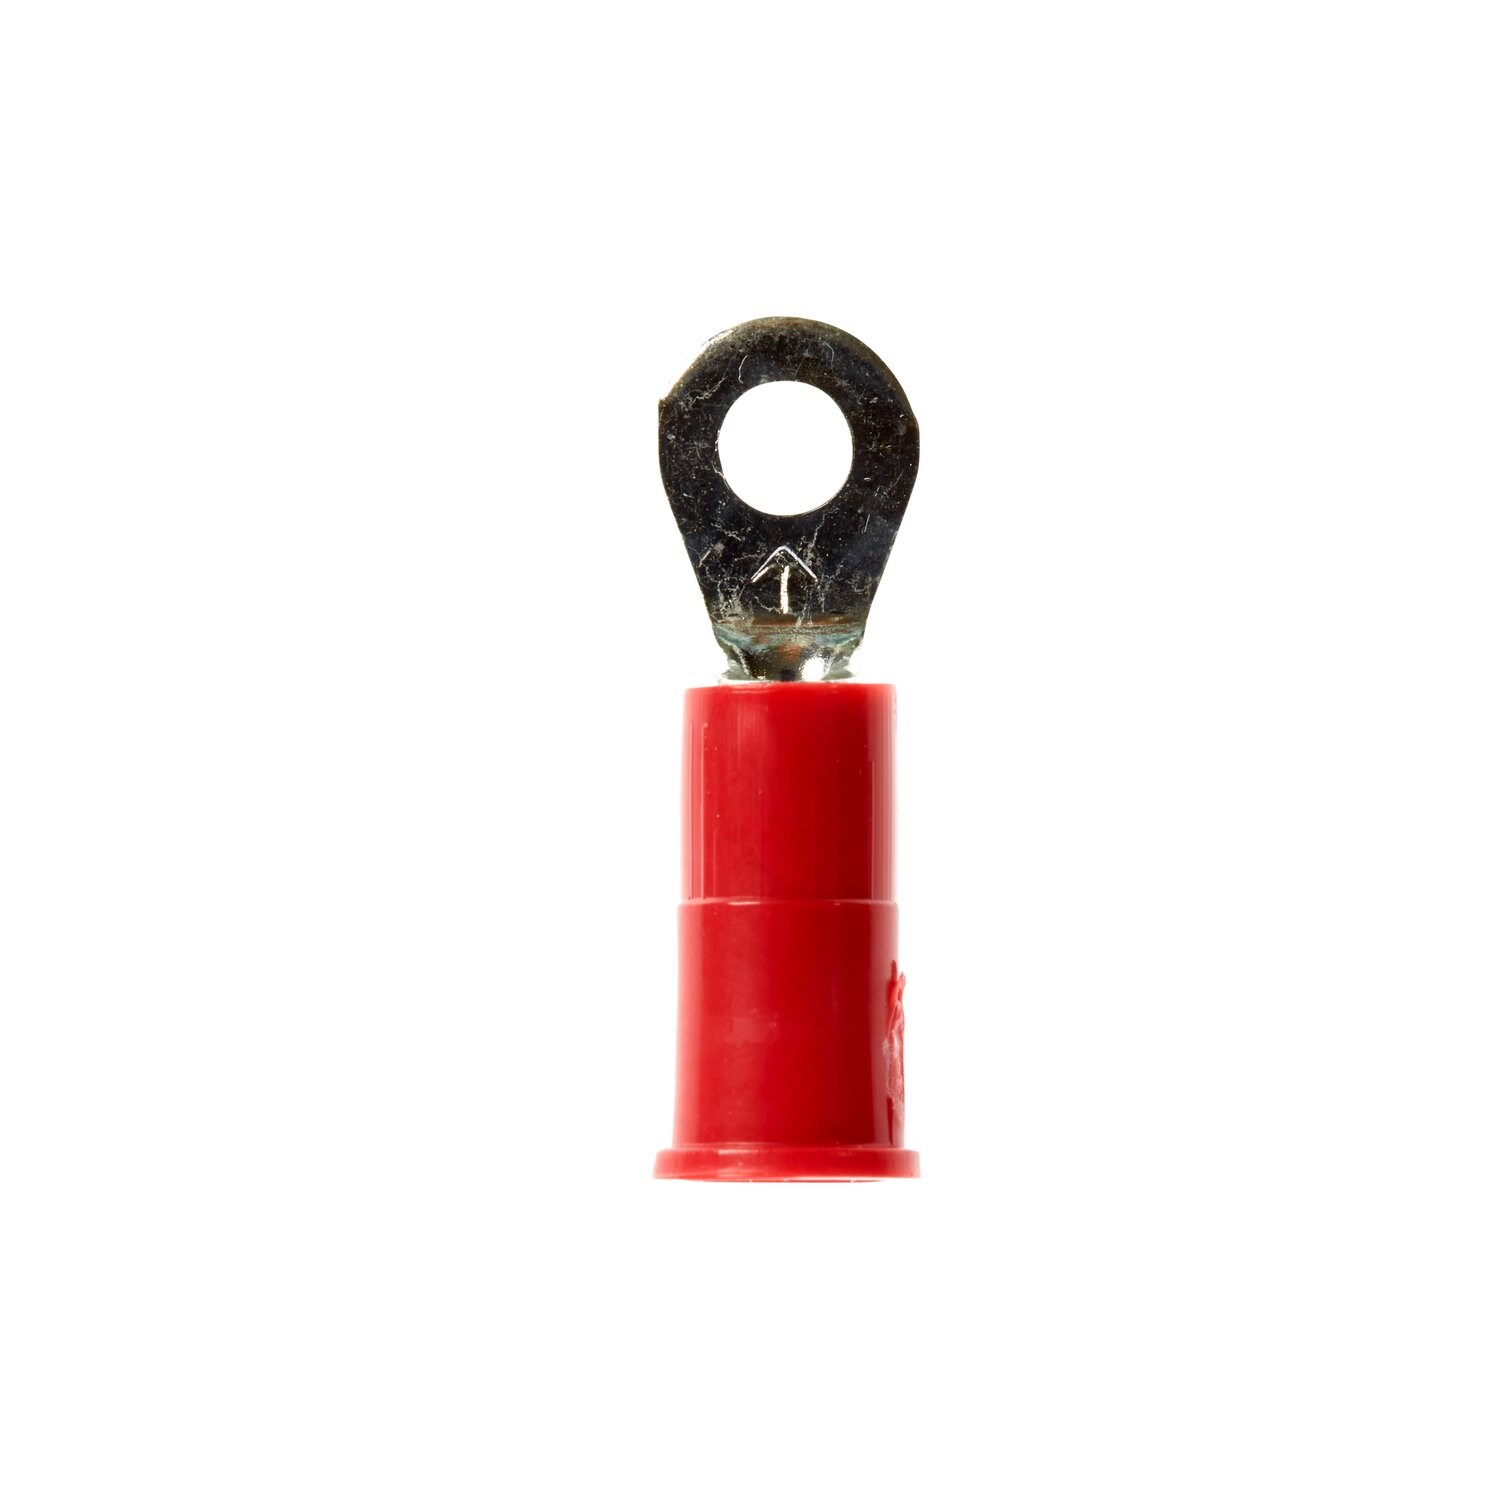 Peg Hook Product Stoppers, 1 Nylon Inventory Control Clips - Store  Fixtures Direct